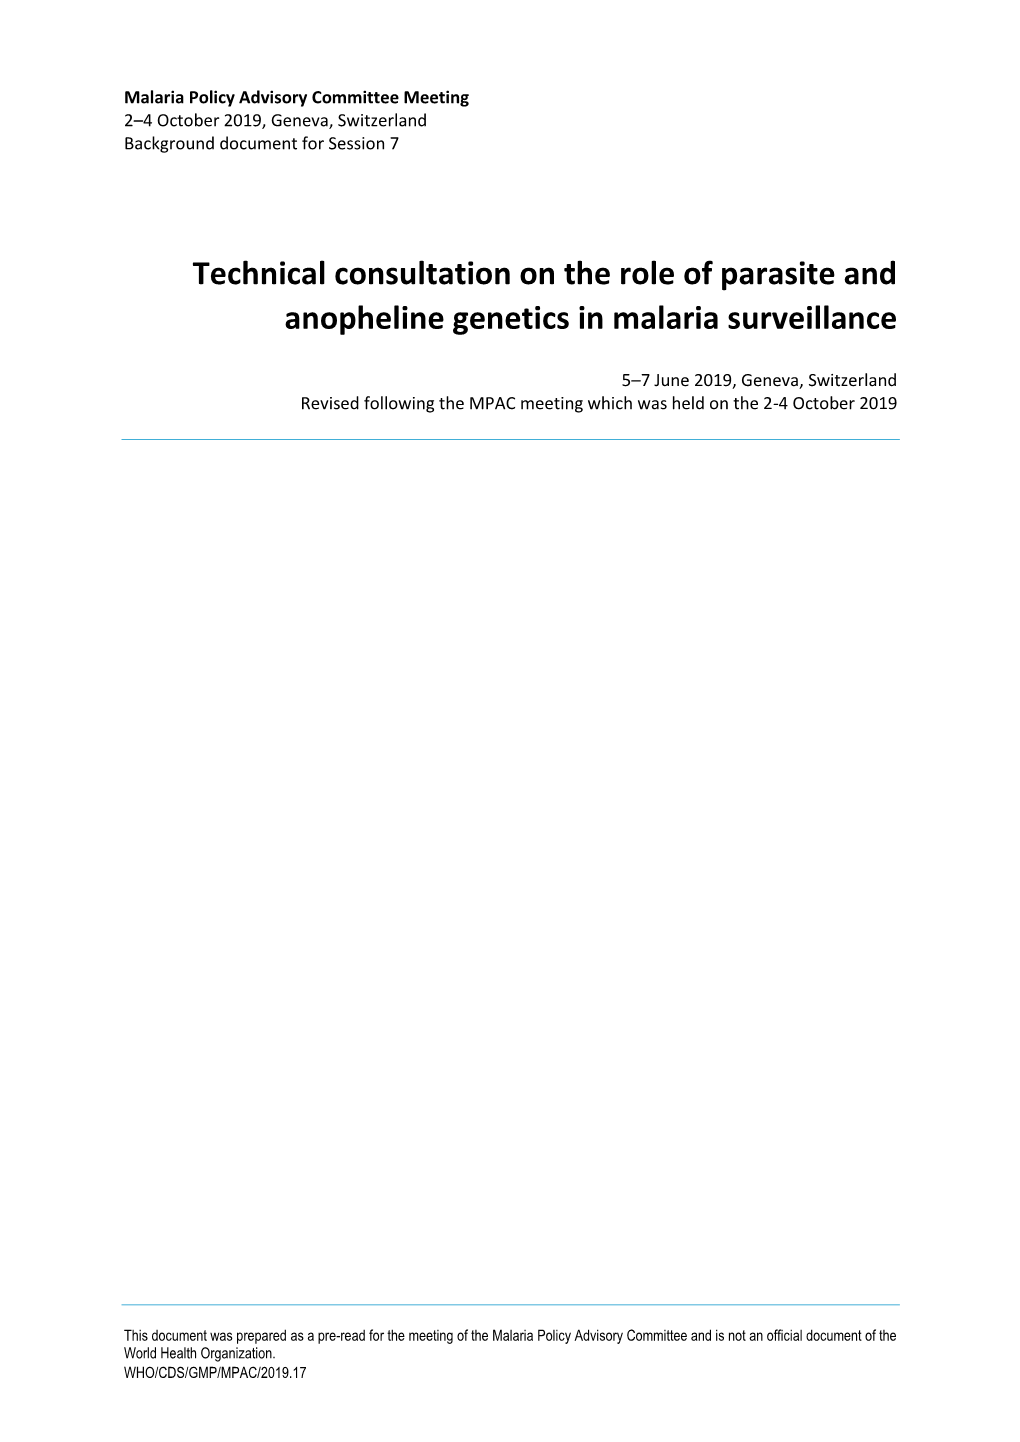 Technical Consultation on the Role of Parasite and Anopheline Genetics in Malaria Surveillance